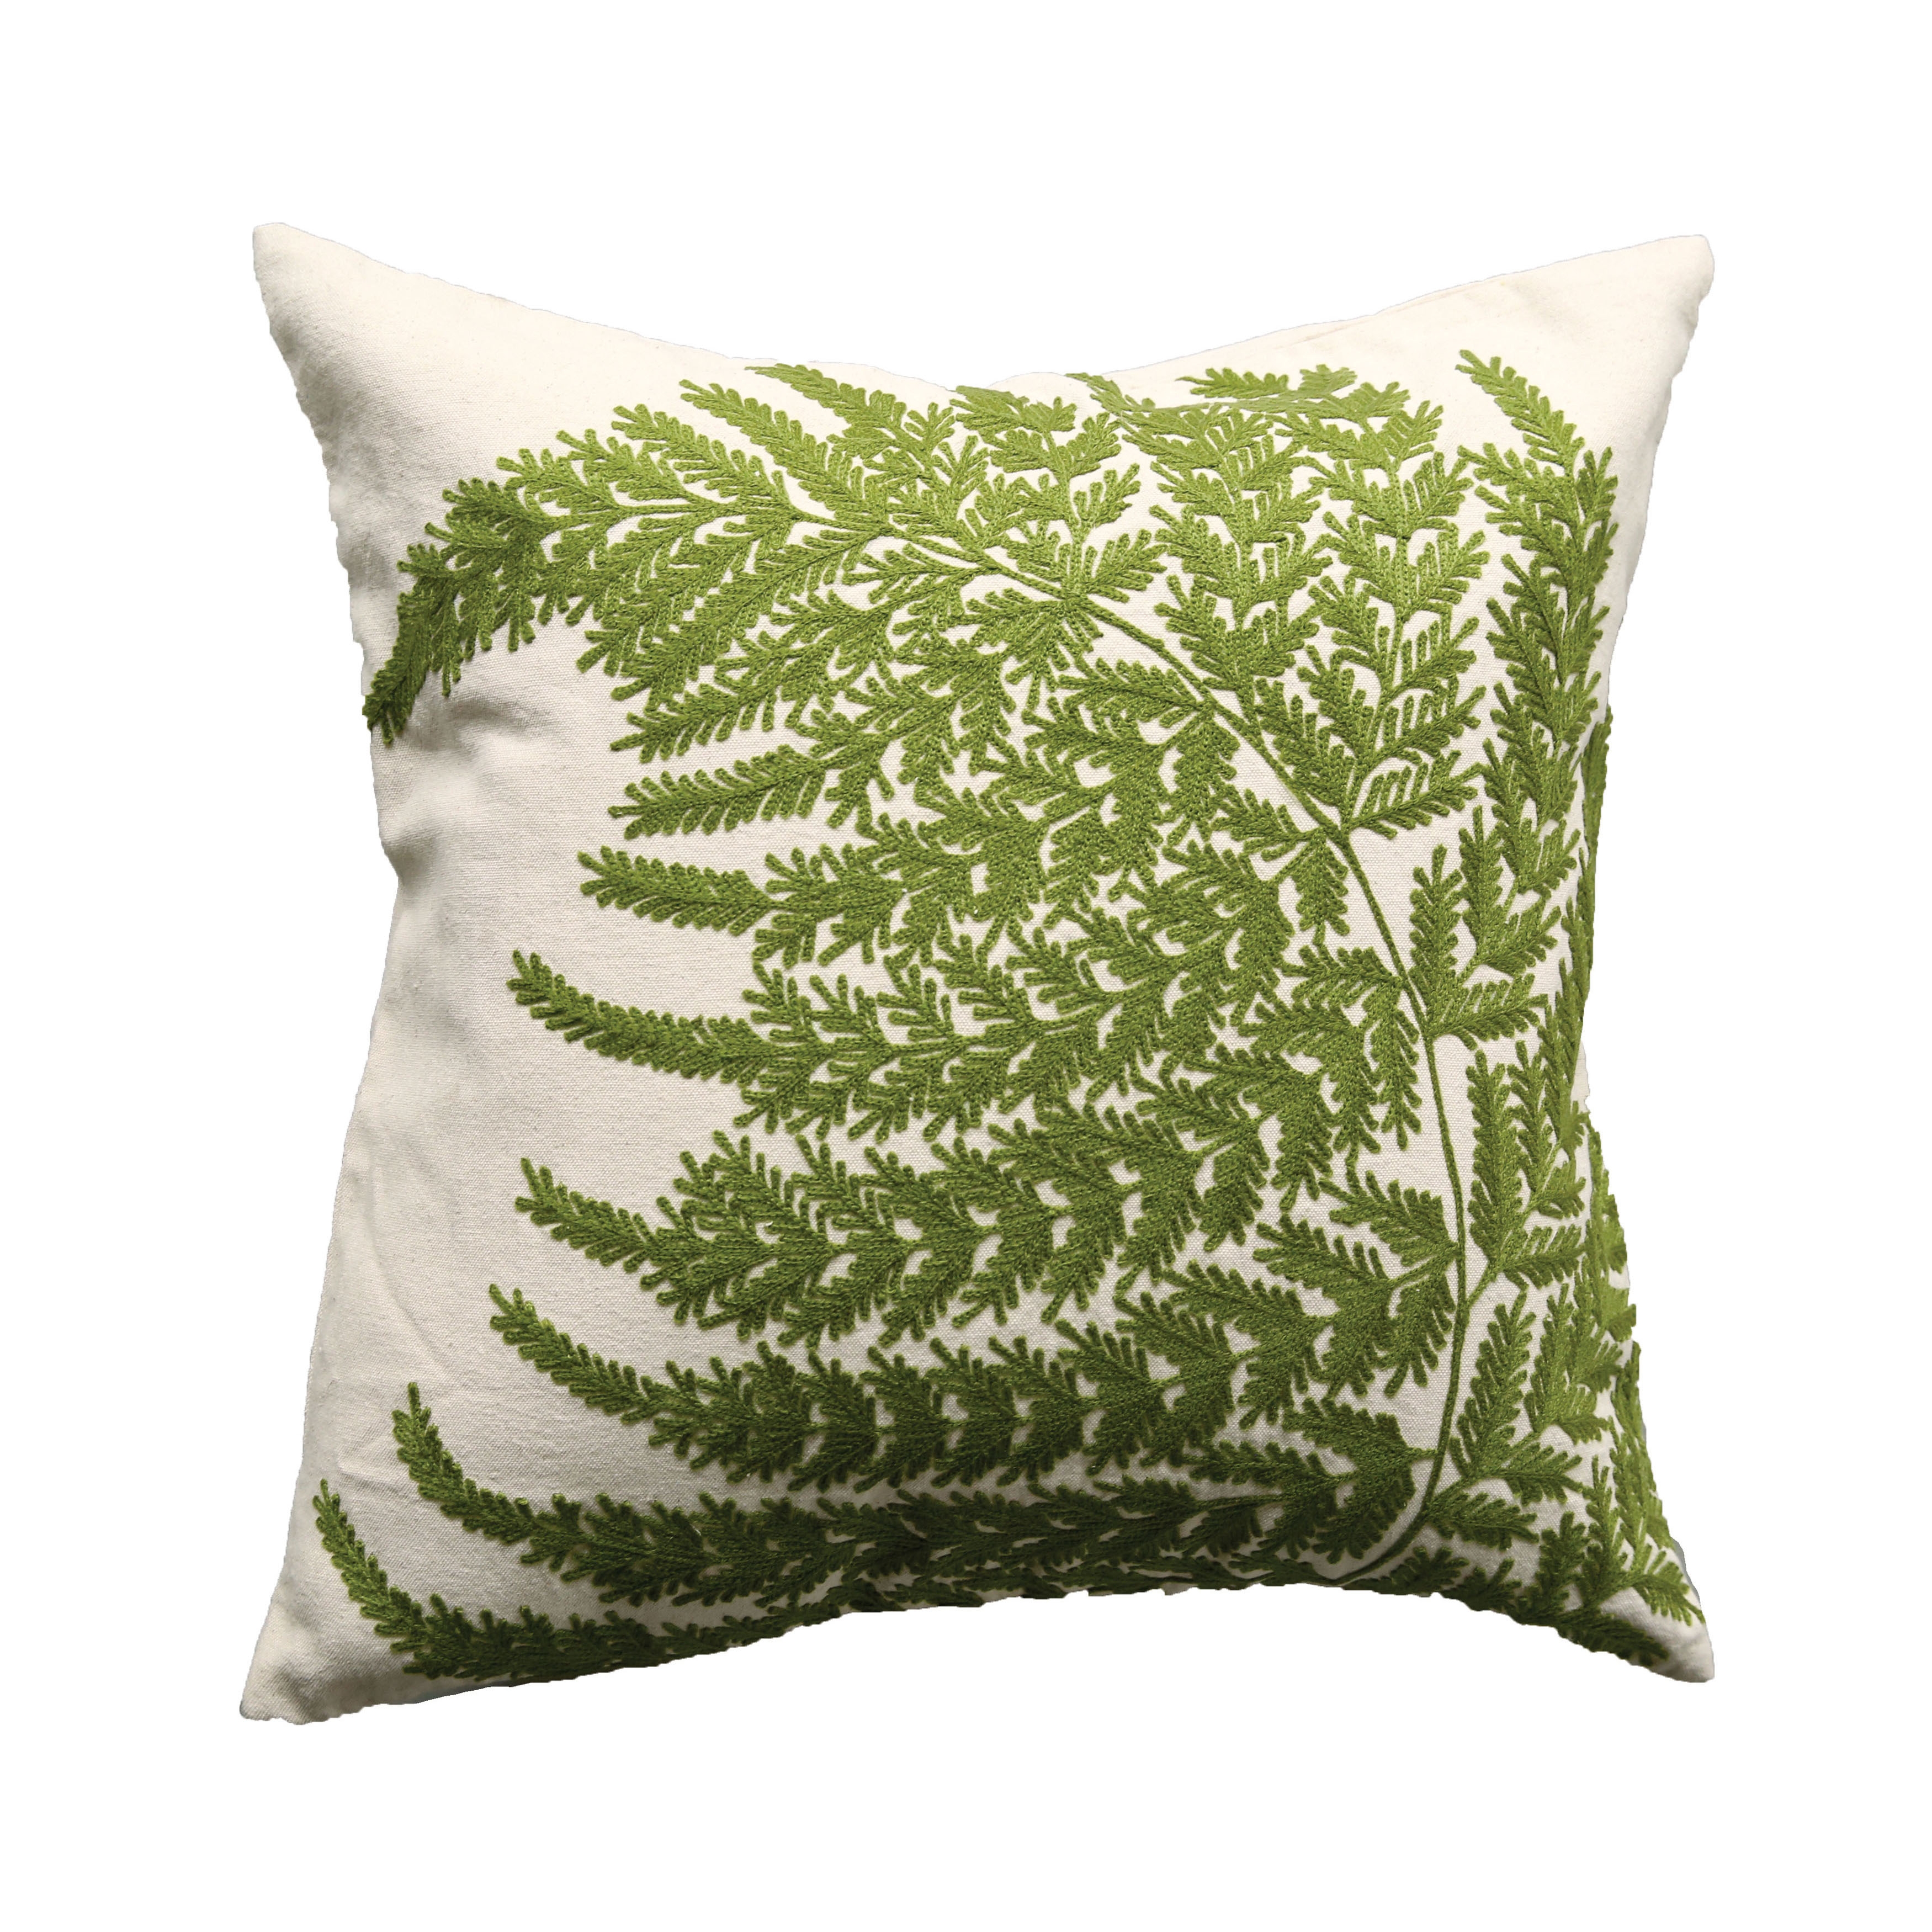 White Square Cotton Pillow with Embroidered Green Ferns - Image 0